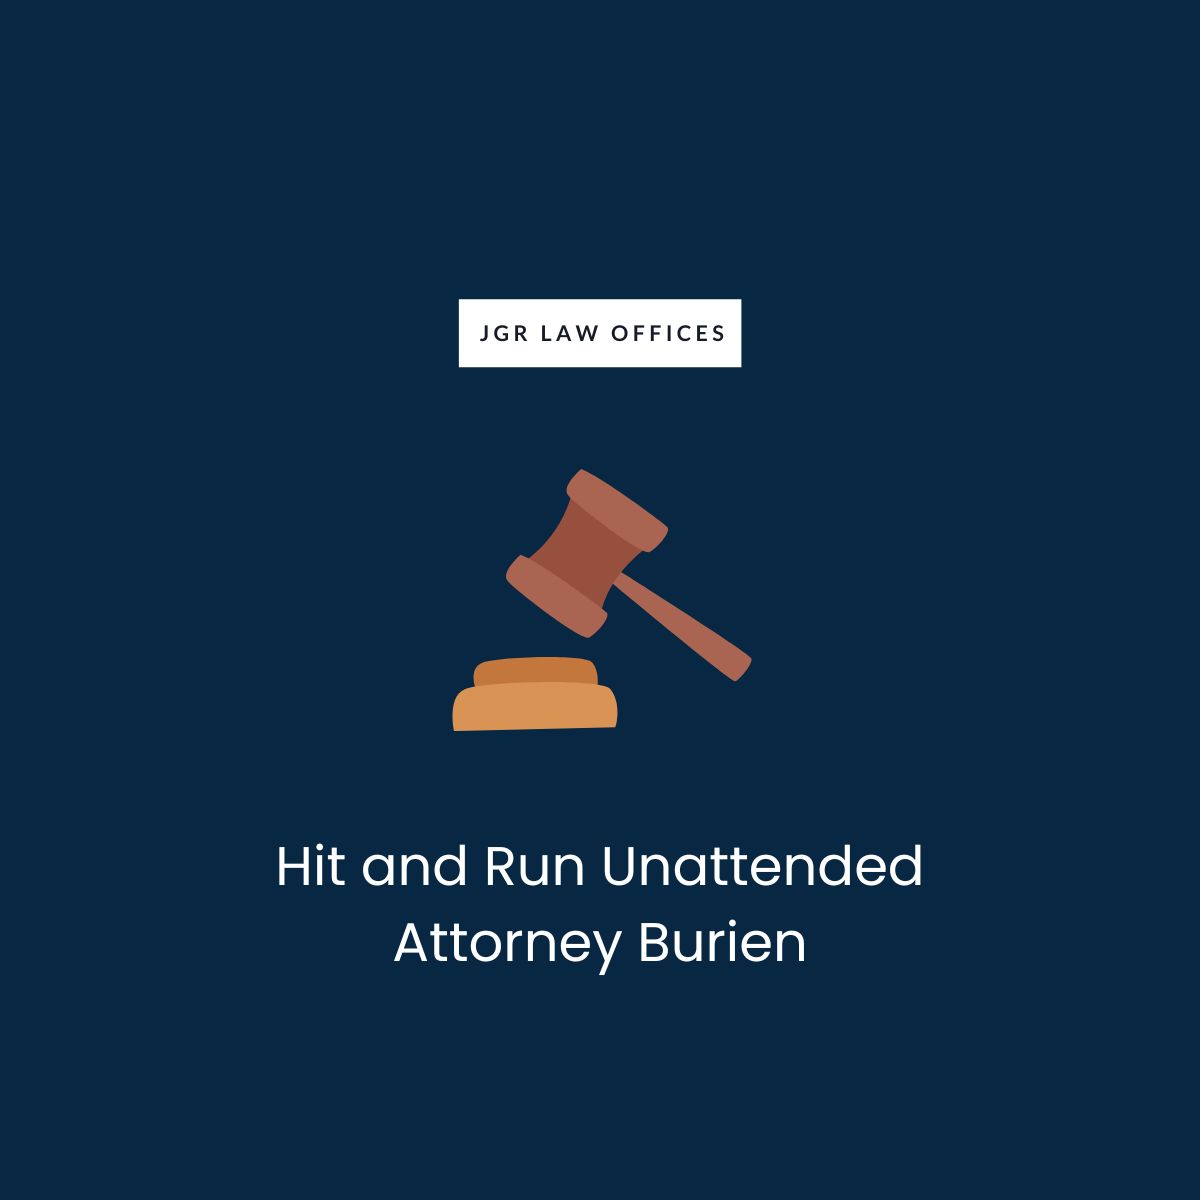 Hit and Run Unattended Lawyer Burien Hit and Run Unattended